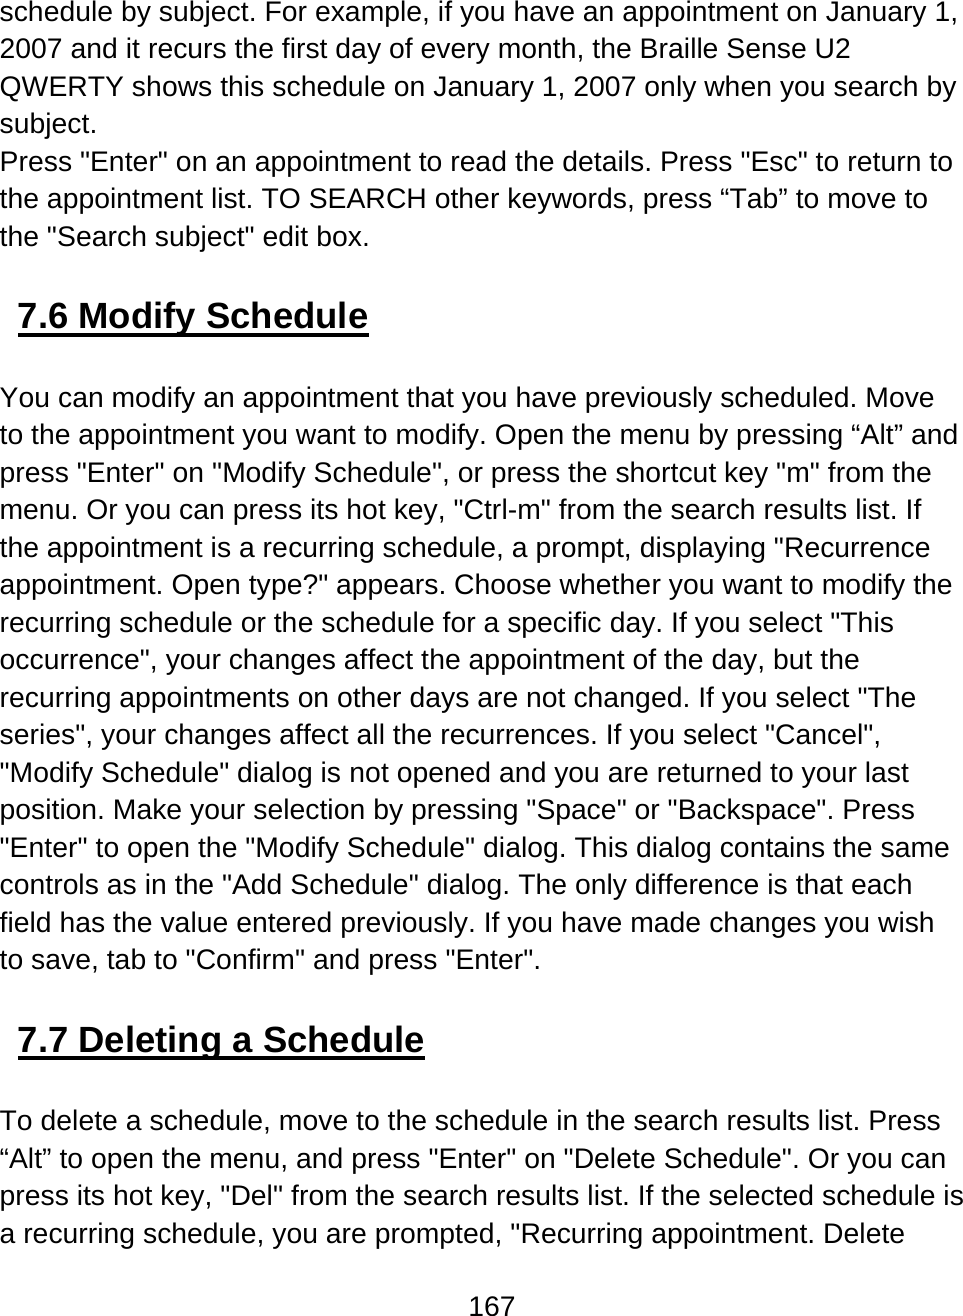 167  schedule by subject. For example, if you have an appointment on January 1, 2007 and it recurs the first day of every month, the Braille Sense U2 QWERTY shows this schedule on January 1, 2007 only when you search by subject. Press &quot;Enter&quot; on an appointment to read the details. Press &quot;Esc&quot; to return to the appointment list. TO SEARCH other keywords, press “Tab” to move to the &quot;Search subject&quot; edit box.  7.6 Modify Schedule  You can modify an appointment that you have previously scheduled. Move to the appointment you want to modify. Open the menu by pressing “Alt” and press &quot;Enter&quot; on &quot;Modify Schedule&quot;, or press the shortcut key &quot;m&quot; from the menu. Or you can press its hot key, &quot;Ctrl-m&quot; from the search results list. If the appointment is a recurring schedule, a prompt, displaying &quot;Recurrence appointment. Open type?&quot; appears. Choose whether you want to modify the recurring schedule or the schedule for a specific day. If you select &quot;This occurrence&quot;, your changes affect the appointment of the day, but the recurring appointments on other days are not changed. If you select &quot;The series&quot;, your changes affect all the recurrences. If you select &quot;Cancel&quot;, &quot;Modify Schedule&quot; dialog is not opened and you are returned to your last position. Make your selection by pressing &quot;Space&quot; or &quot;Backspace&quot;. Press &quot;Enter&quot; to open the &quot;Modify Schedule&quot; dialog. This dialog contains the same controls as in the &quot;Add Schedule&quot; dialog. The only difference is that each field has the value entered previously. If you have made changes you wish to save, tab to &quot;Confirm&quot; and press &quot;Enter&quot;.   7.7 Deleting a Schedule  To delete a schedule, move to the schedule in the search results list. Press “Alt” to open the menu, and press &quot;Enter&quot; on &quot;Delete Schedule&quot;. Or you can press its hot key, &quot;Del&quot; from the search results list. If the selected schedule is a recurring schedule, you are prompted, &quot;Recurring appointment. Delete 